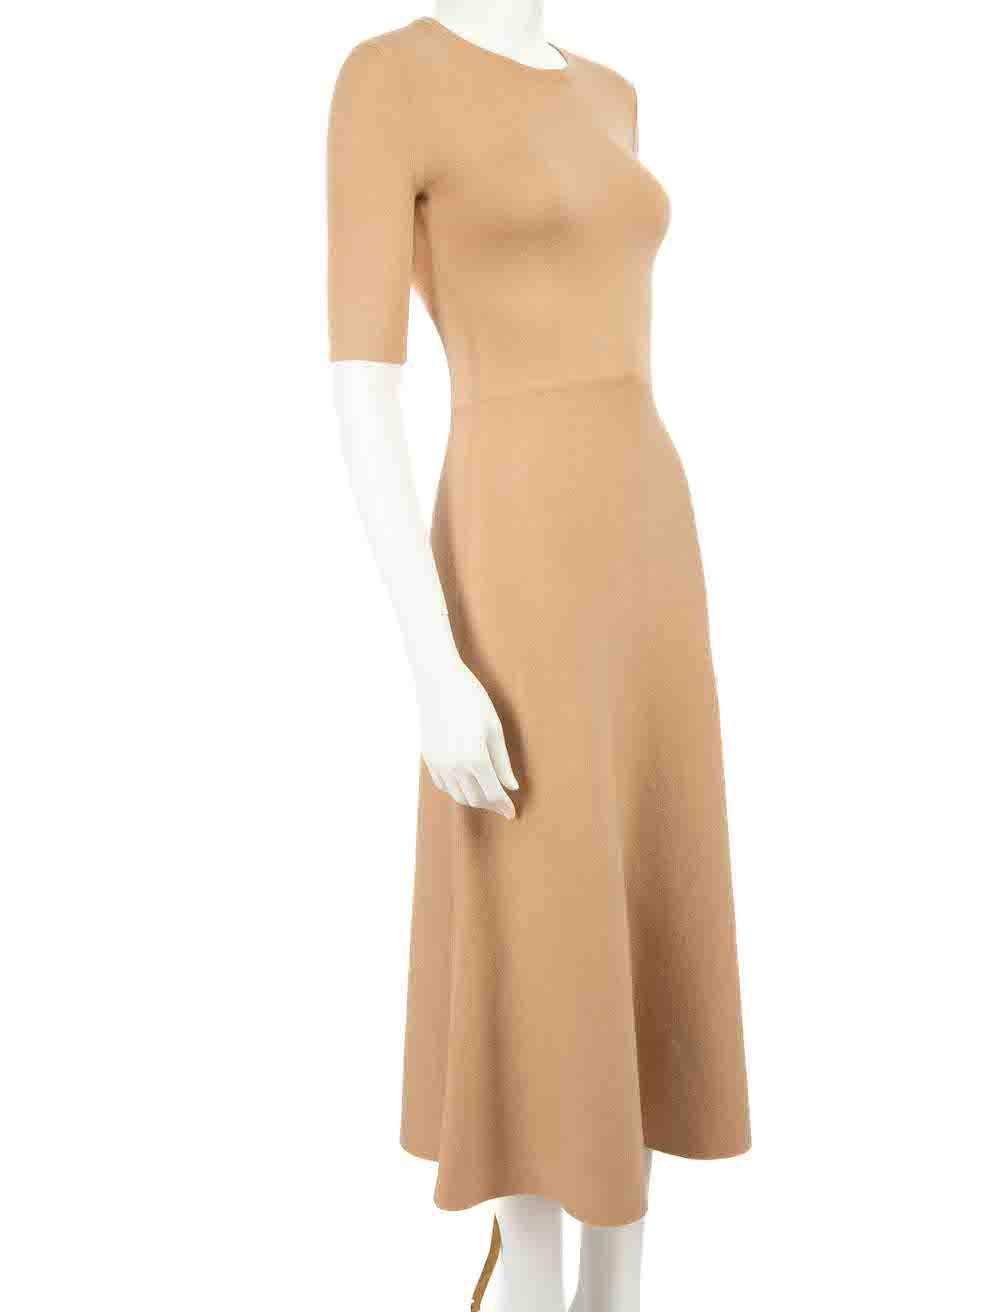 CONDITION is Very good. Minimal wear to dress is evident. Minimal wear with light pilling to the front, back and lining on this used Gabriela Hearst designer resale item.
 
 Details
 Camel
 Wool
 Knit dress
 Short sleeves
 Midi
 Round neck
 
 
 Made